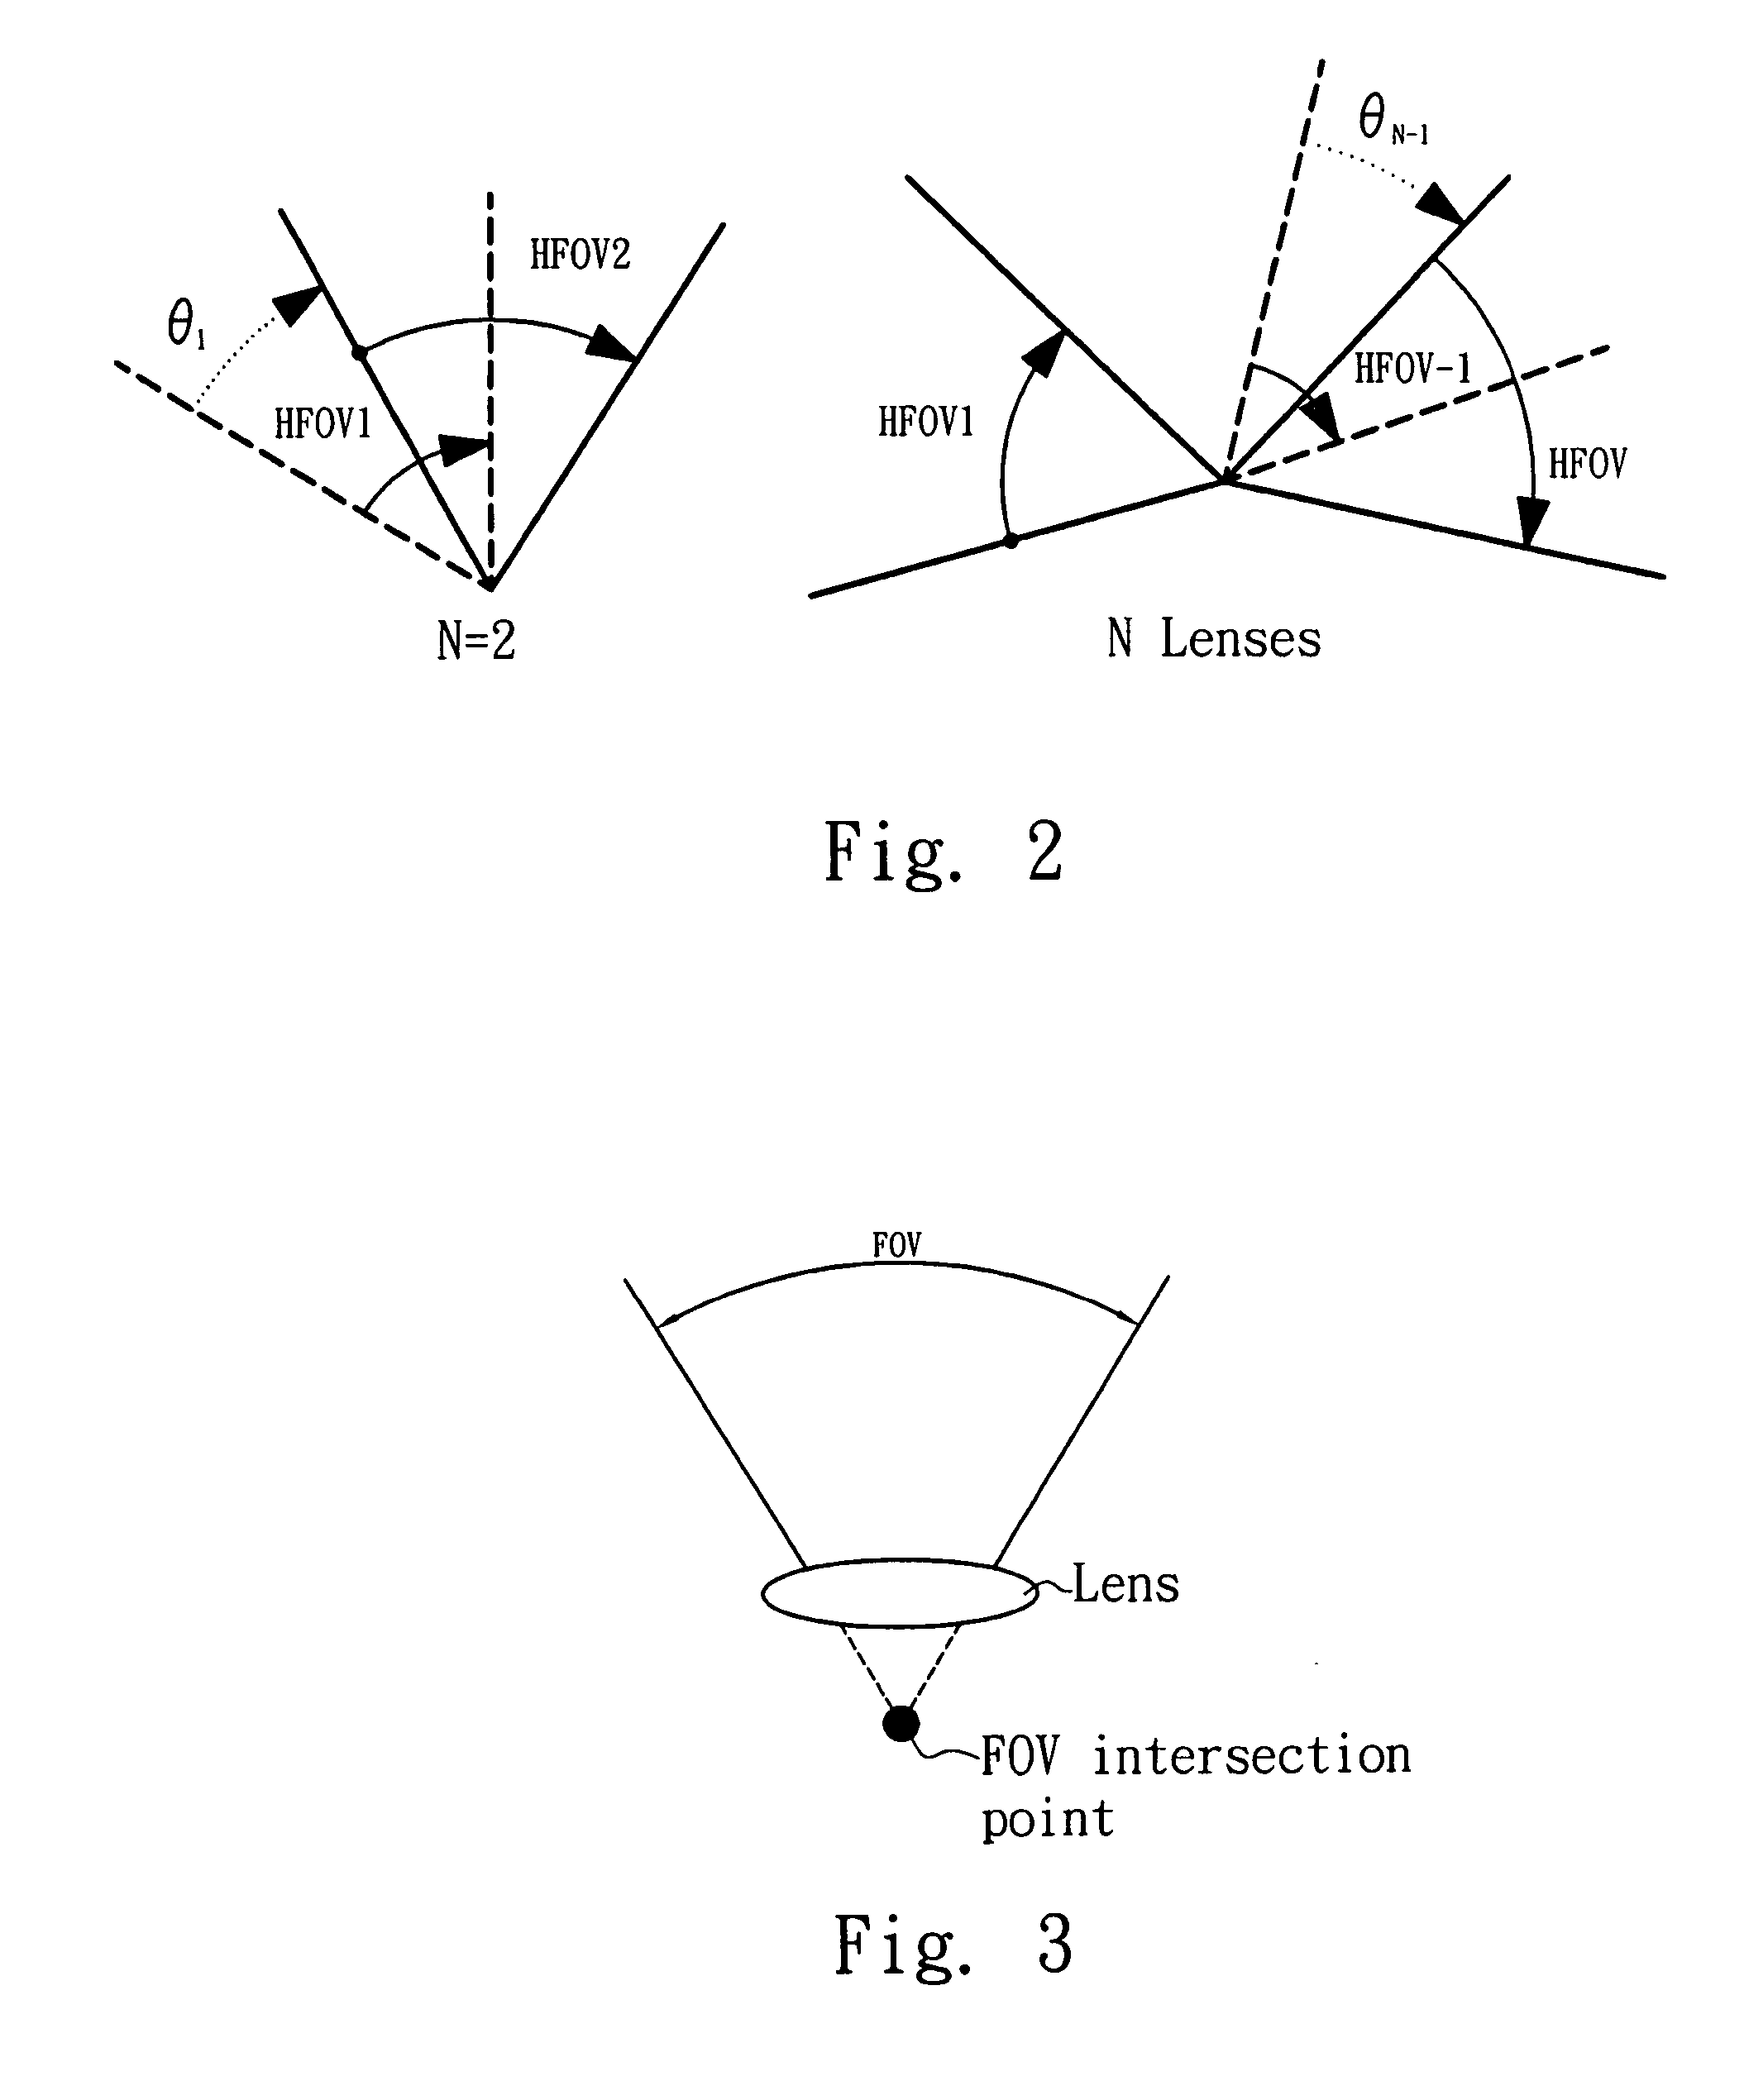 Image pickup device of multiple lens camera system for generating panoramic image